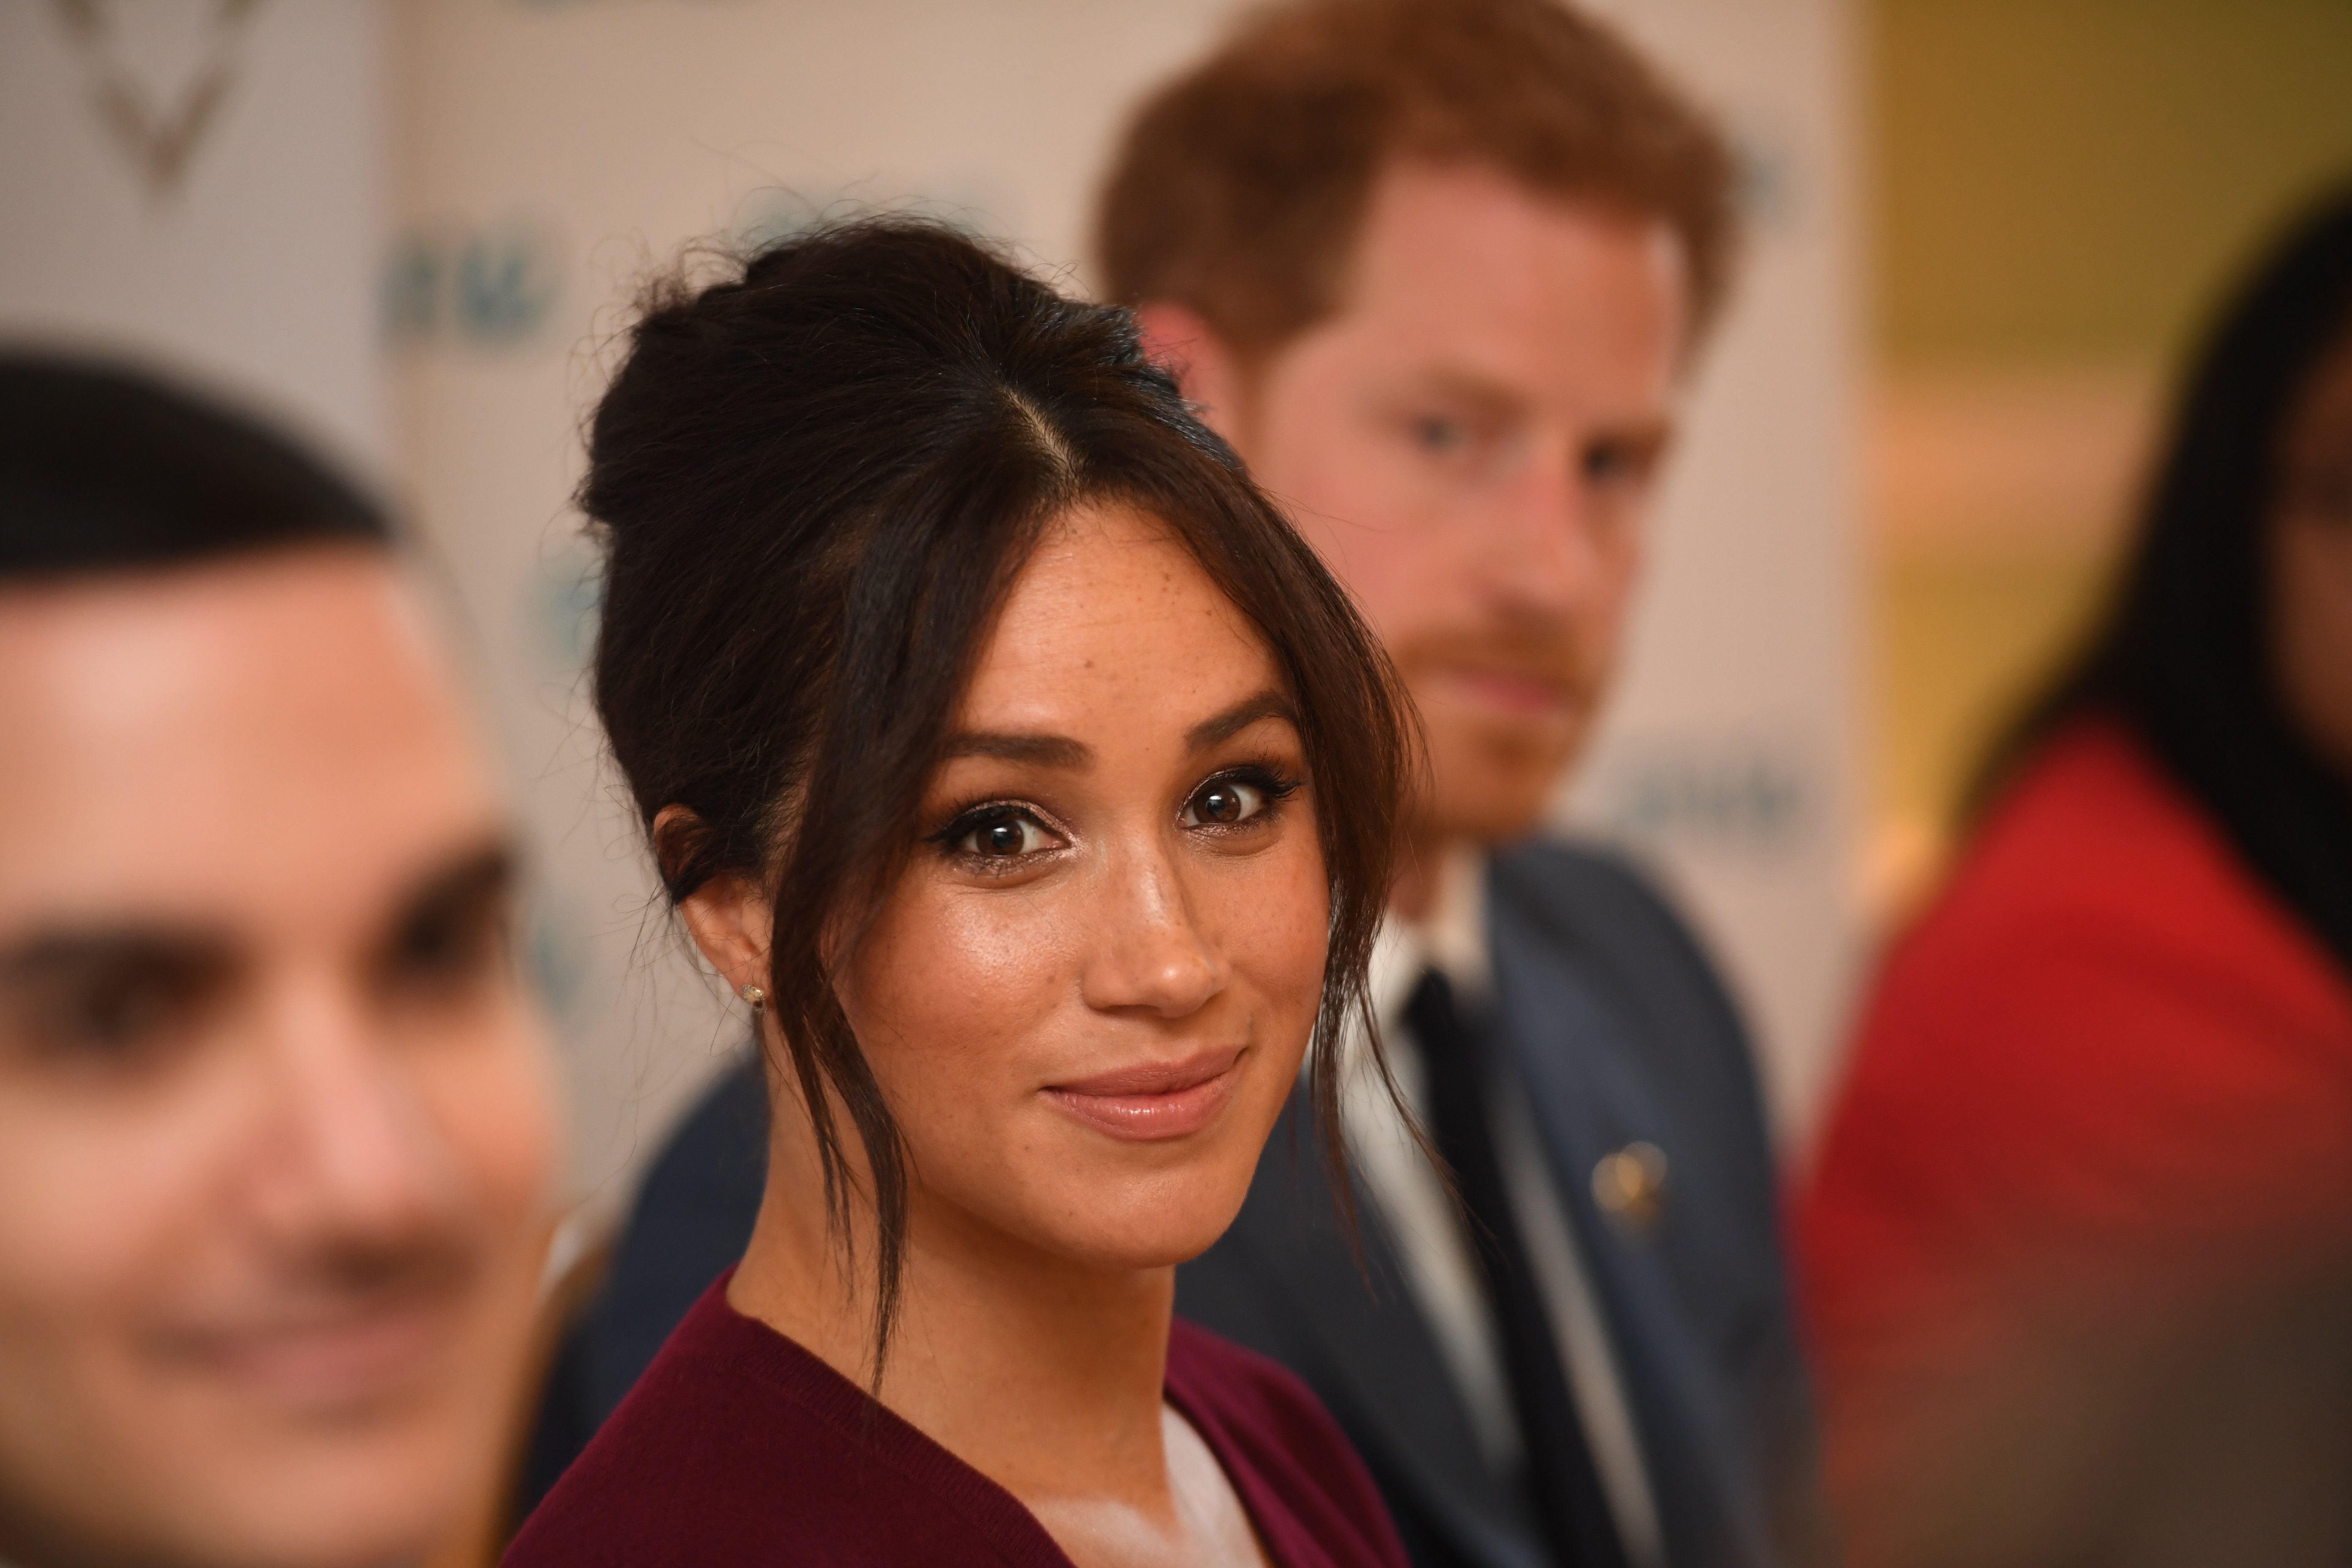 Meghan Markle partners with Cuyana to donate bags to charity